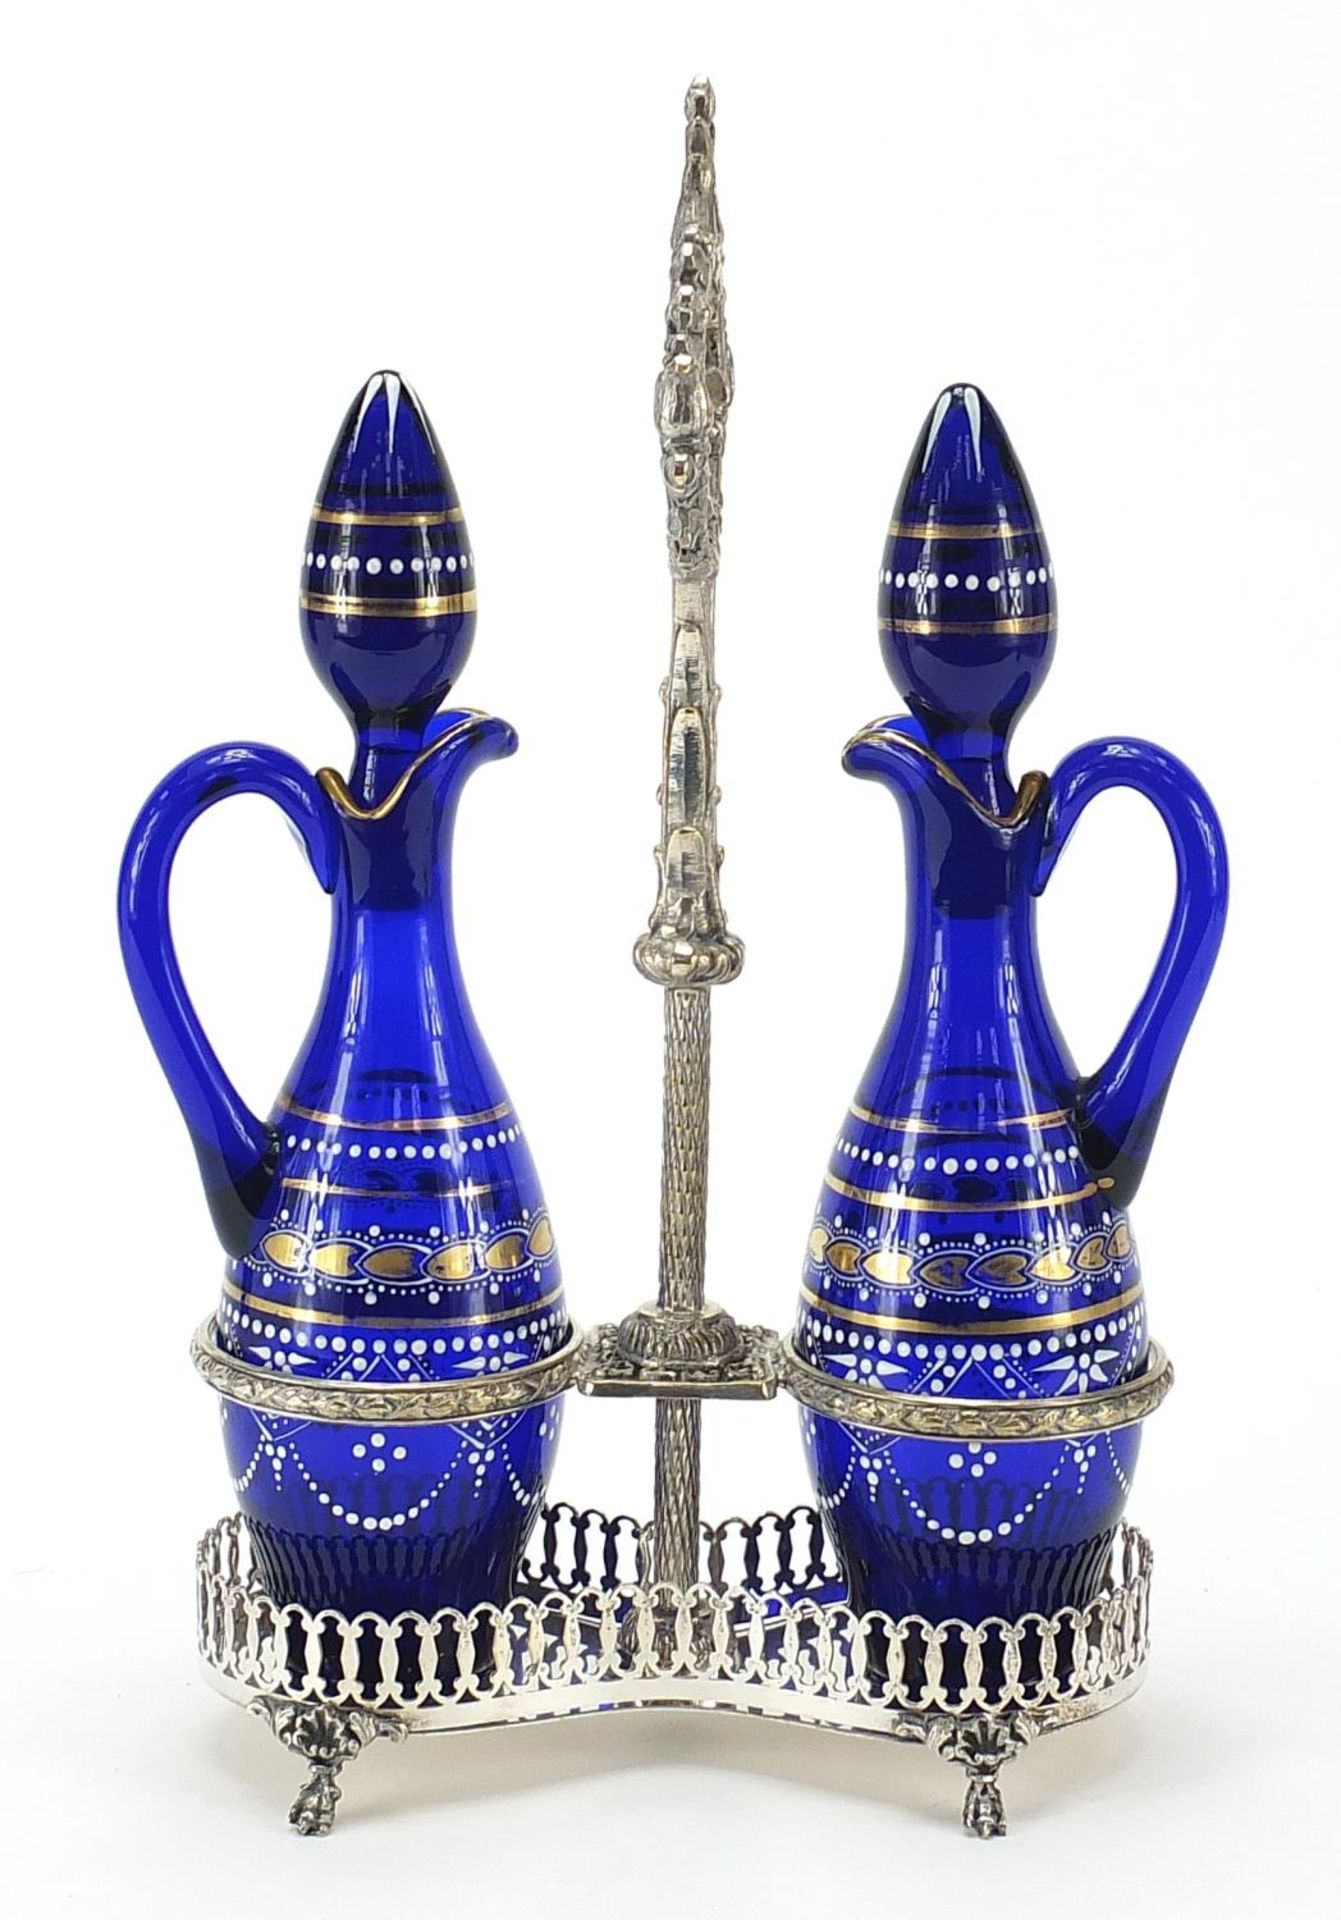 Silver plated oil and vinegar bottle stand with blue glass decanters, 35cm high - Image 2 of 3